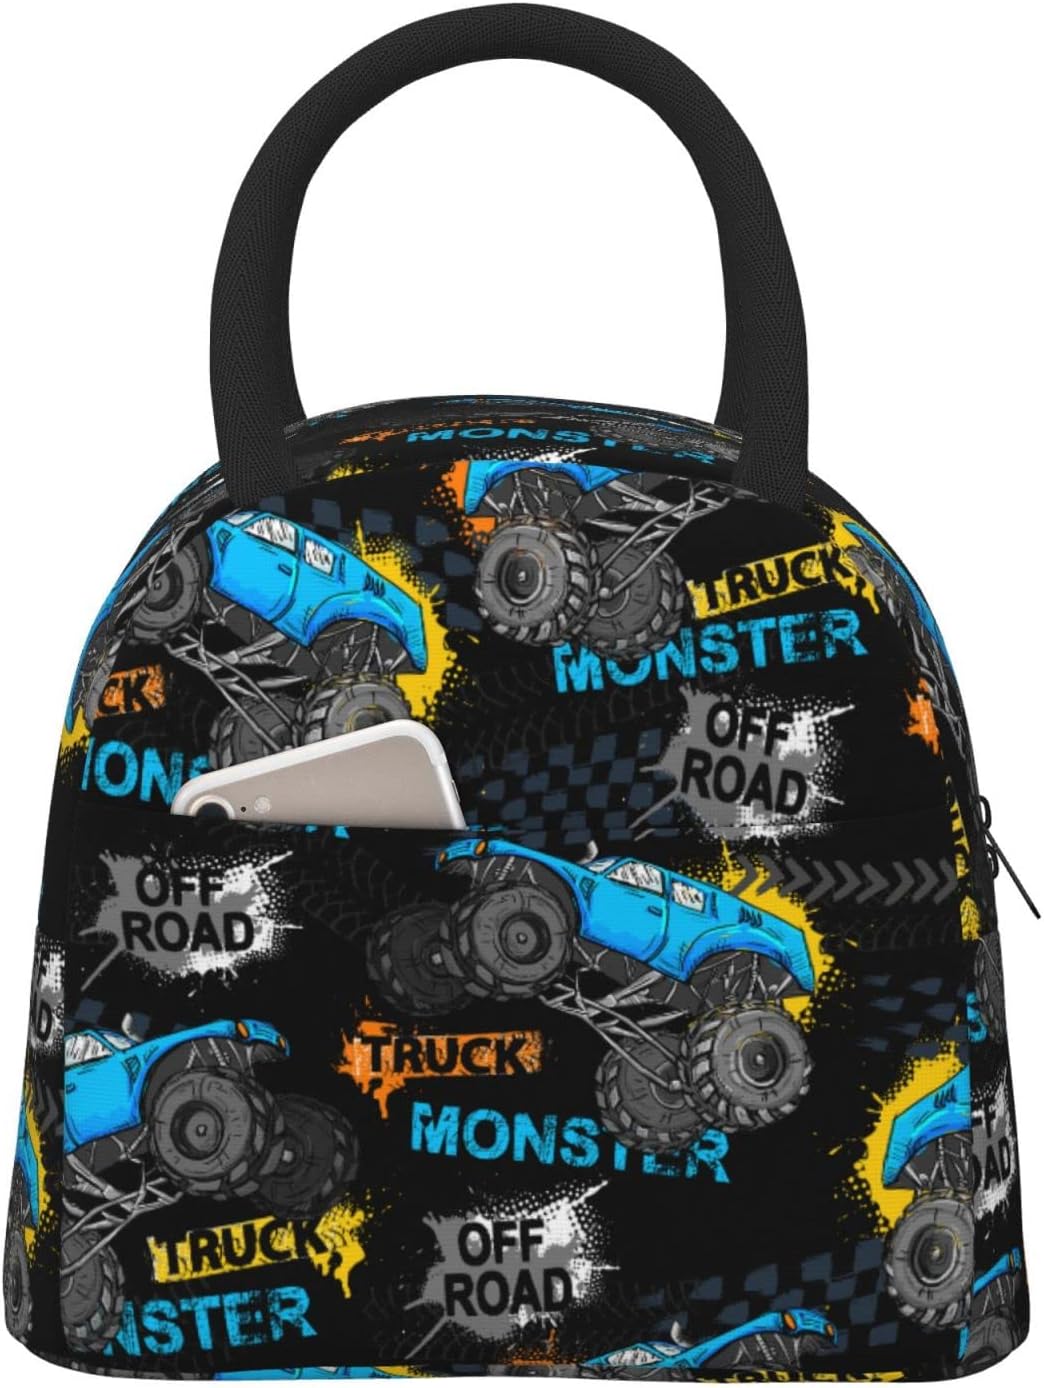 Fiokroo Lunch Bag Insulated Monster Truck Car Extreme Style Lunch Box Reusable Waterproof Lunch Tote Bag For School Work College Outdoor Travel Picnic, 10l